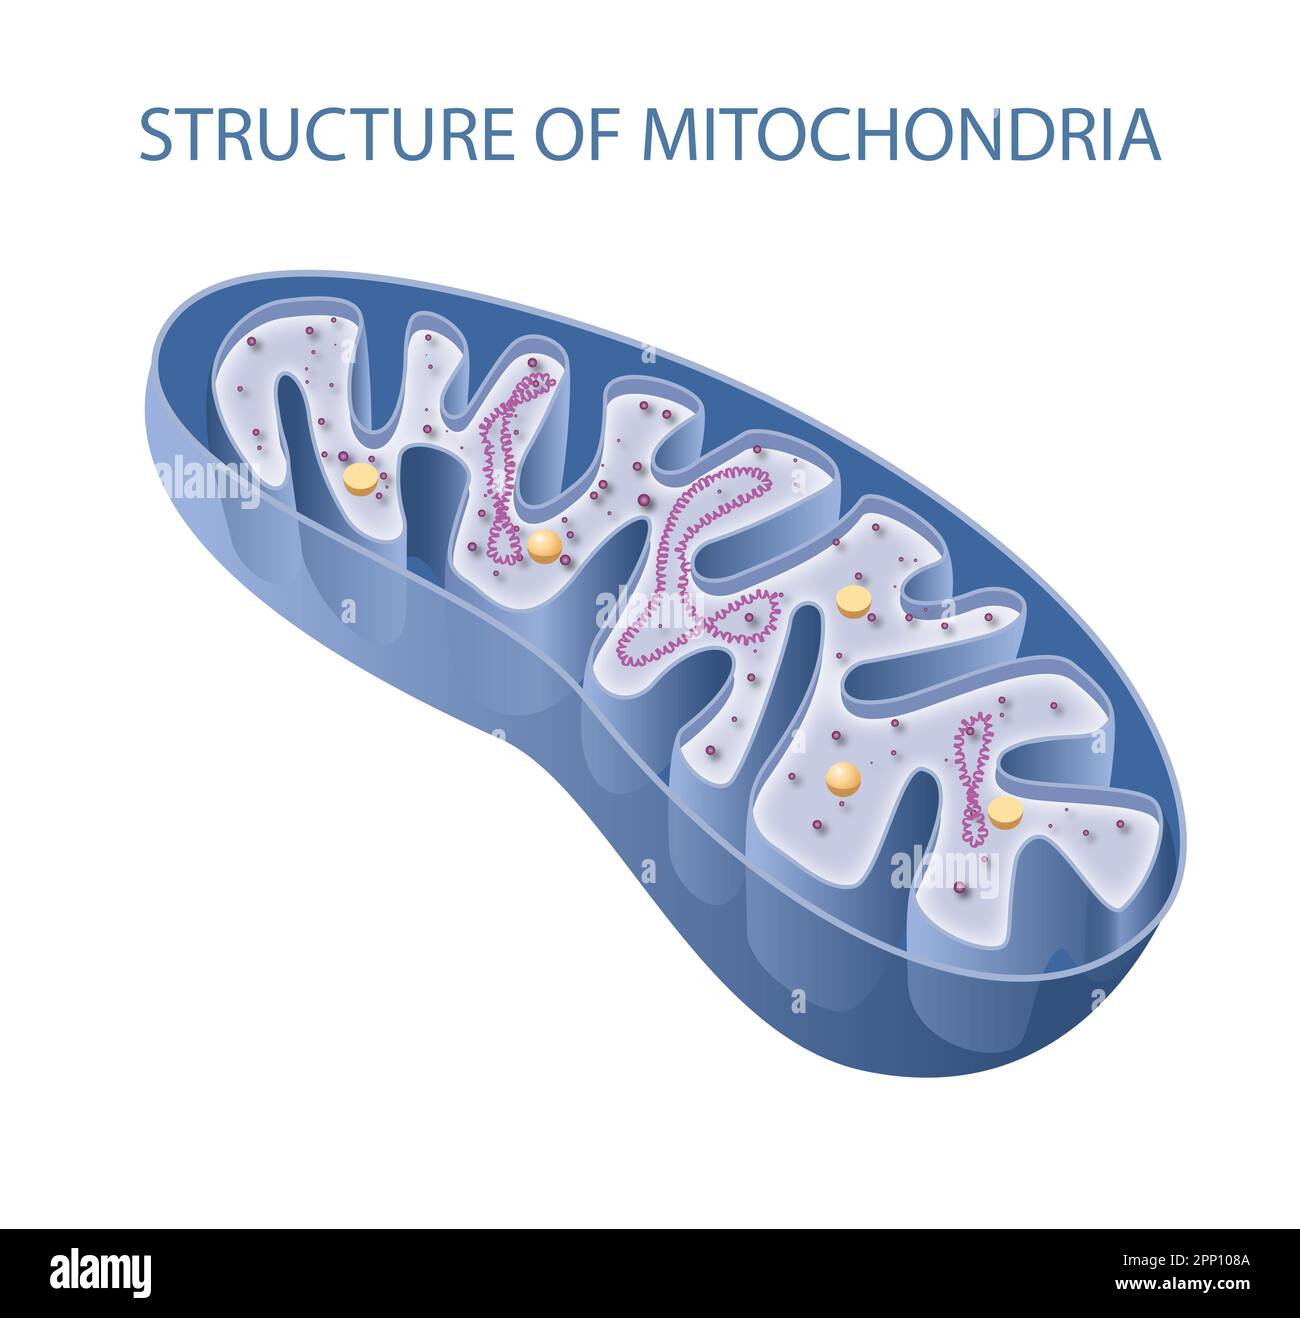 Components of a typical mitochondrion Stock Photo